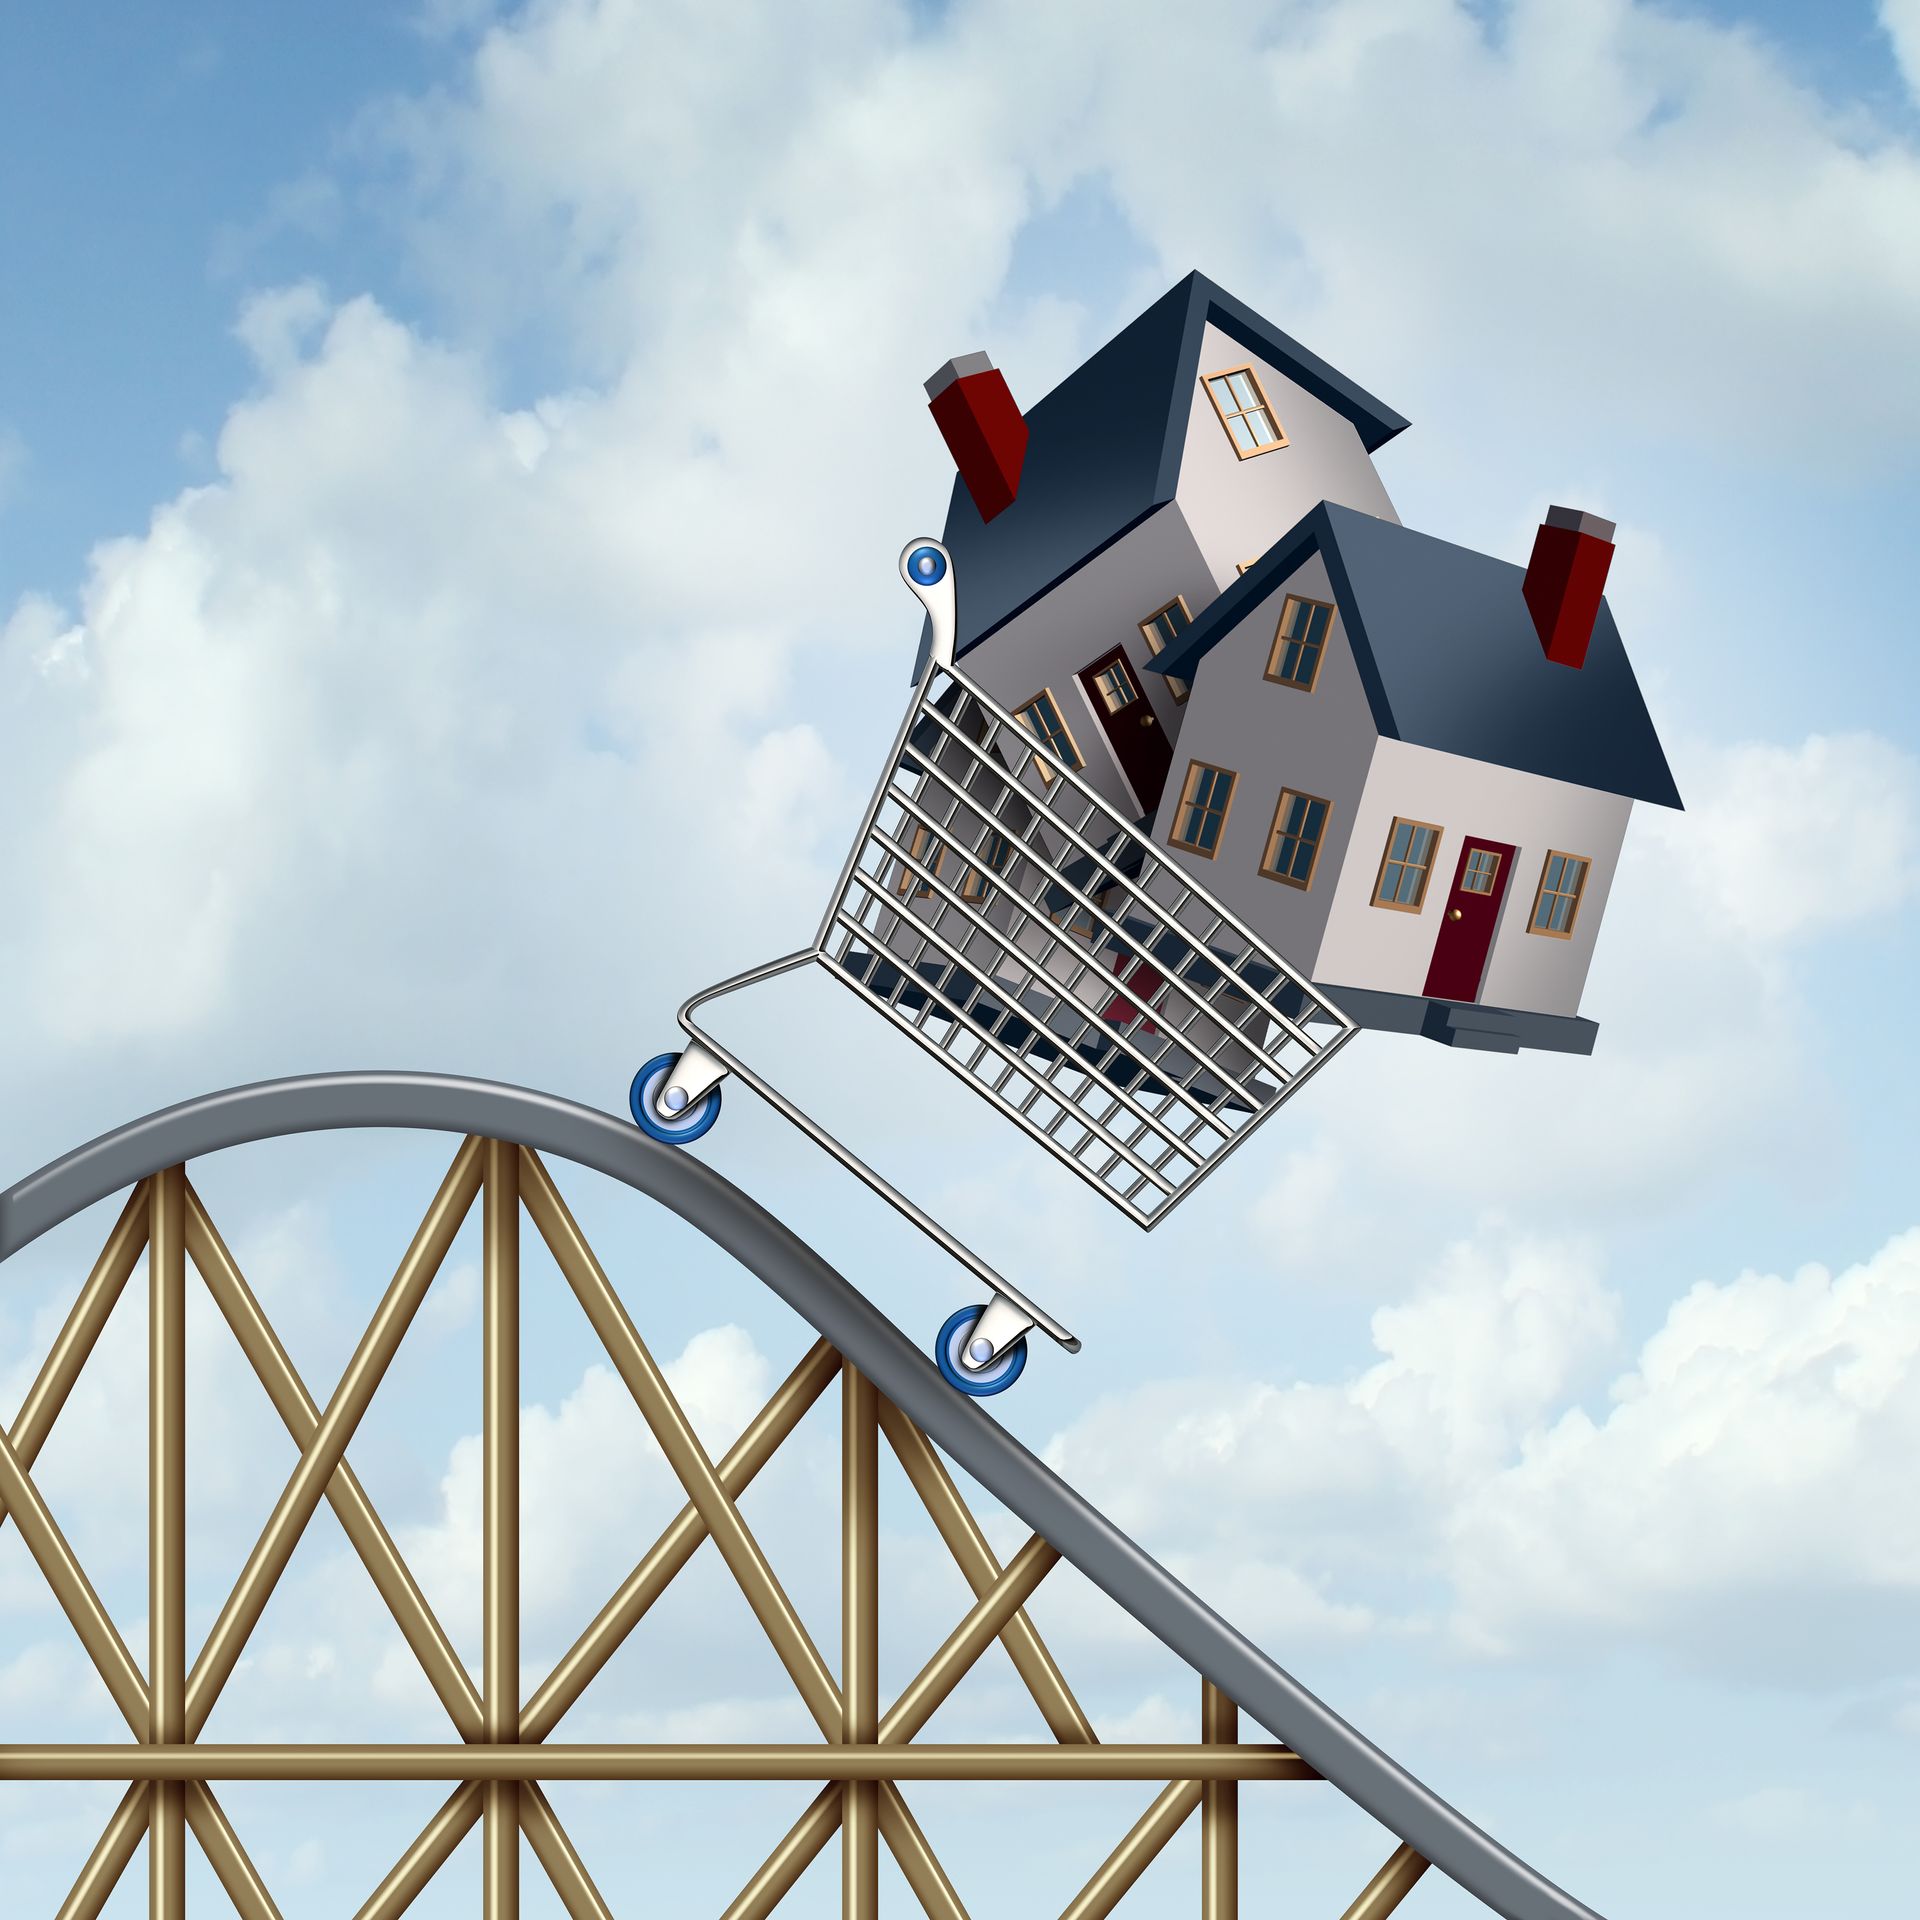 House Price In free fall